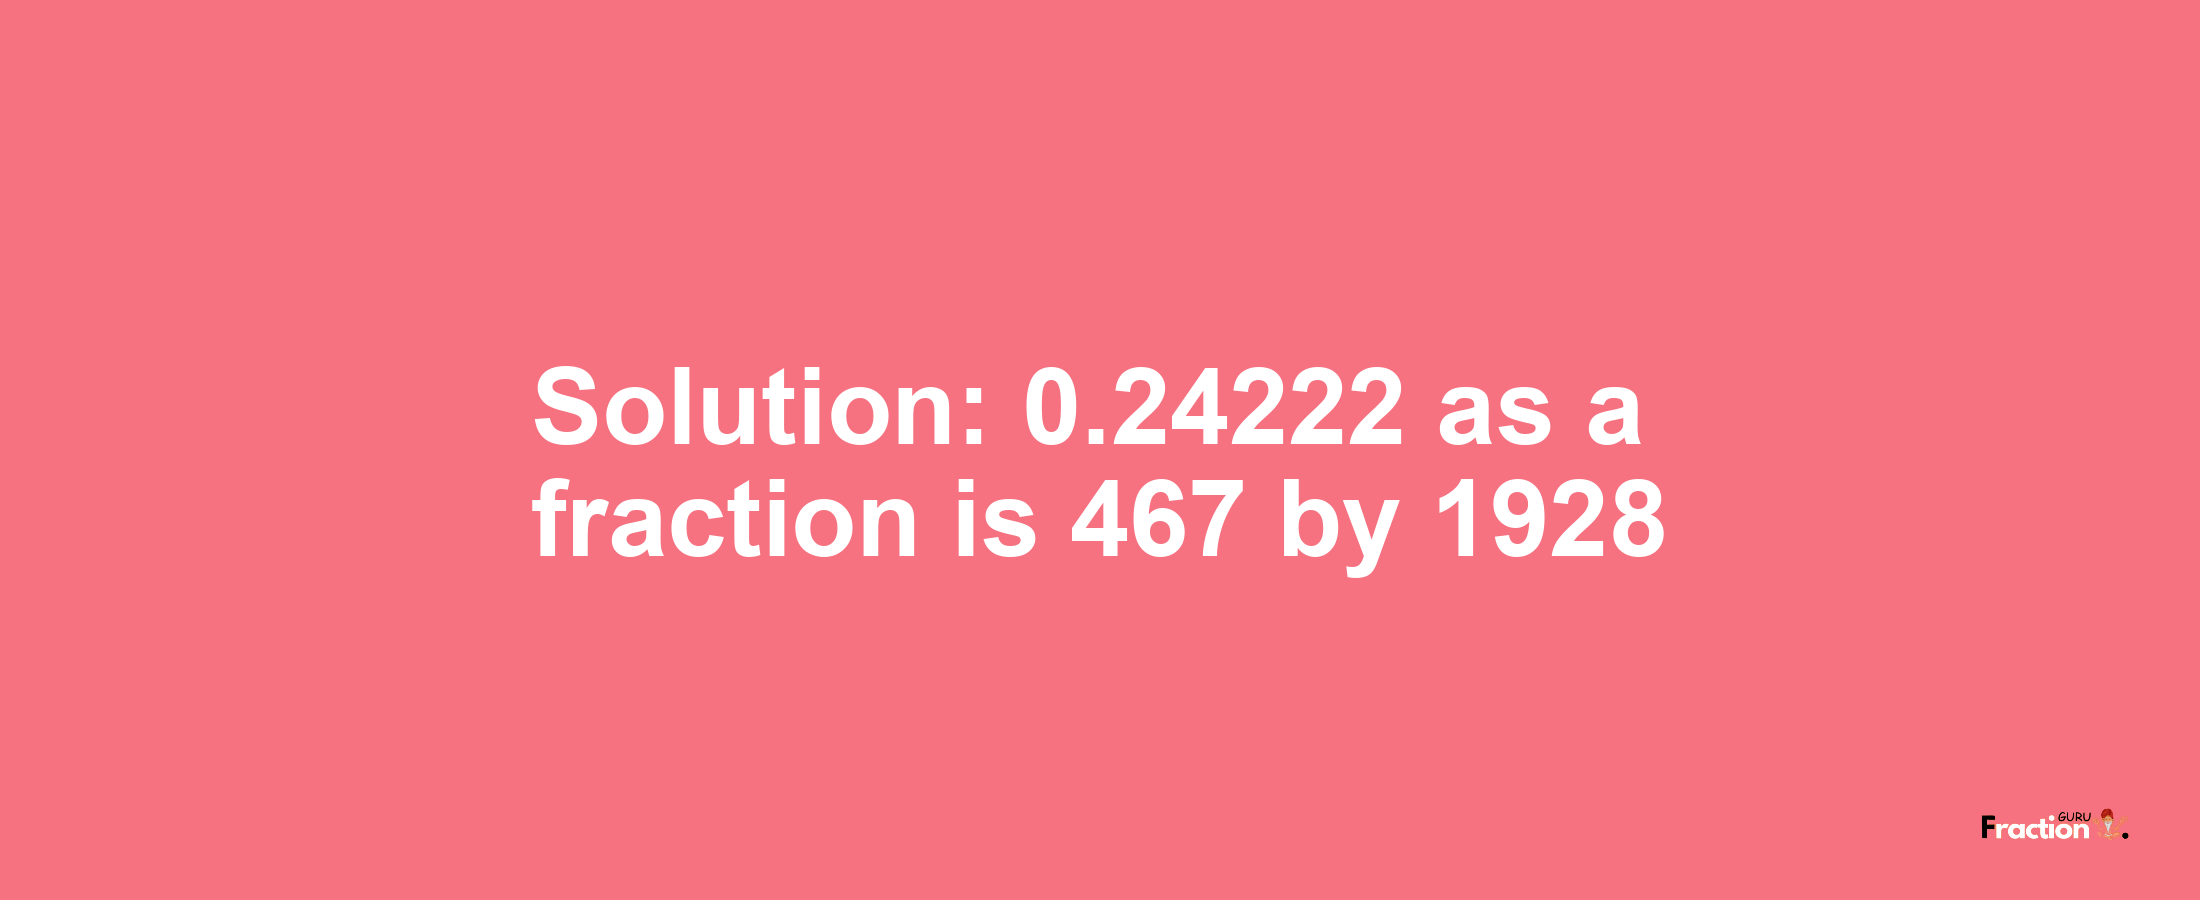 Solution:0.24222 as a fraction is 467/1928